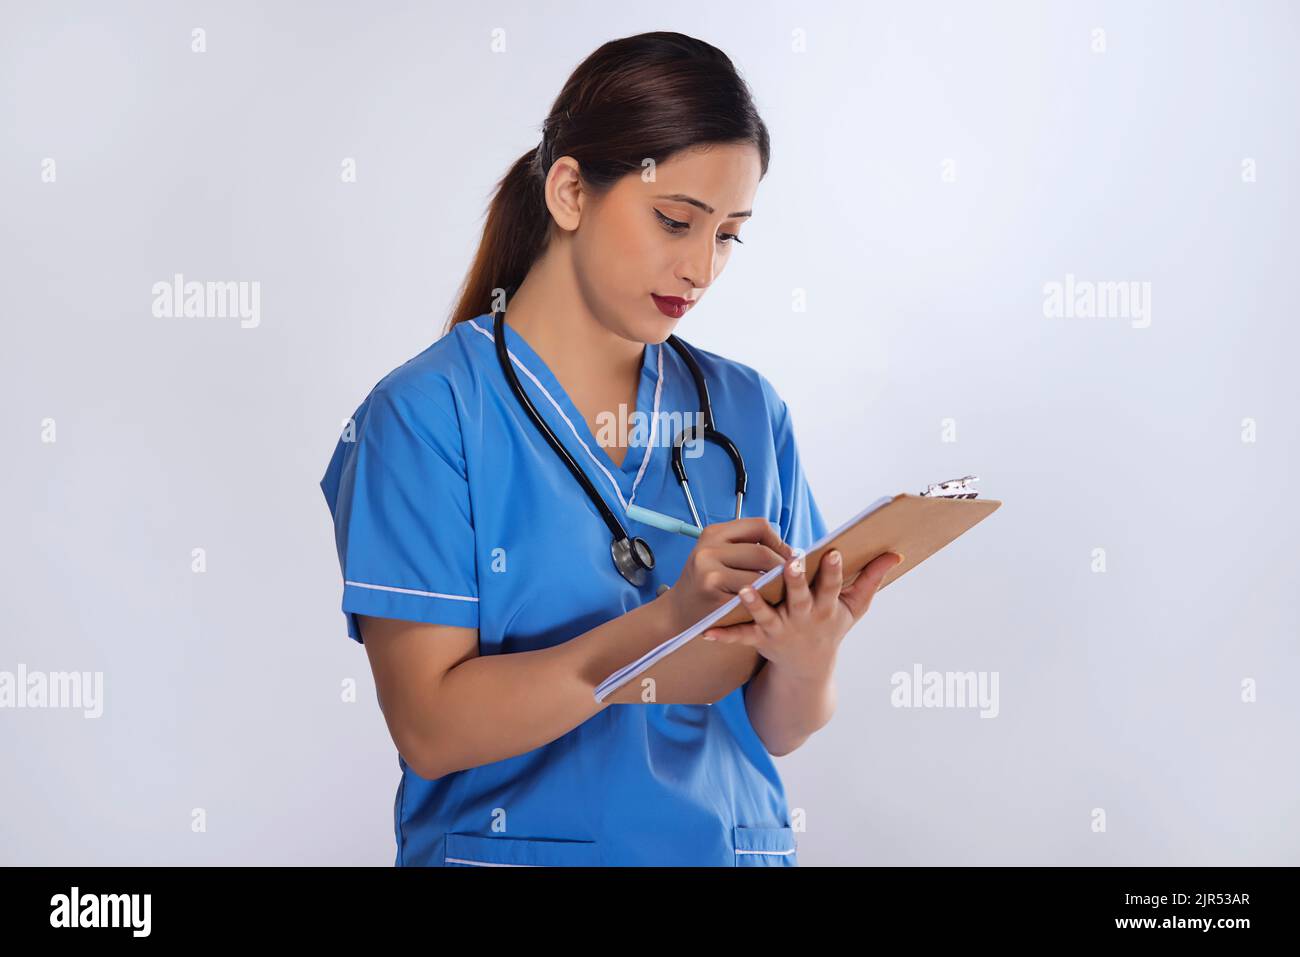 Portrait of a female nurse writing down patient information standing against white background Stock Photo